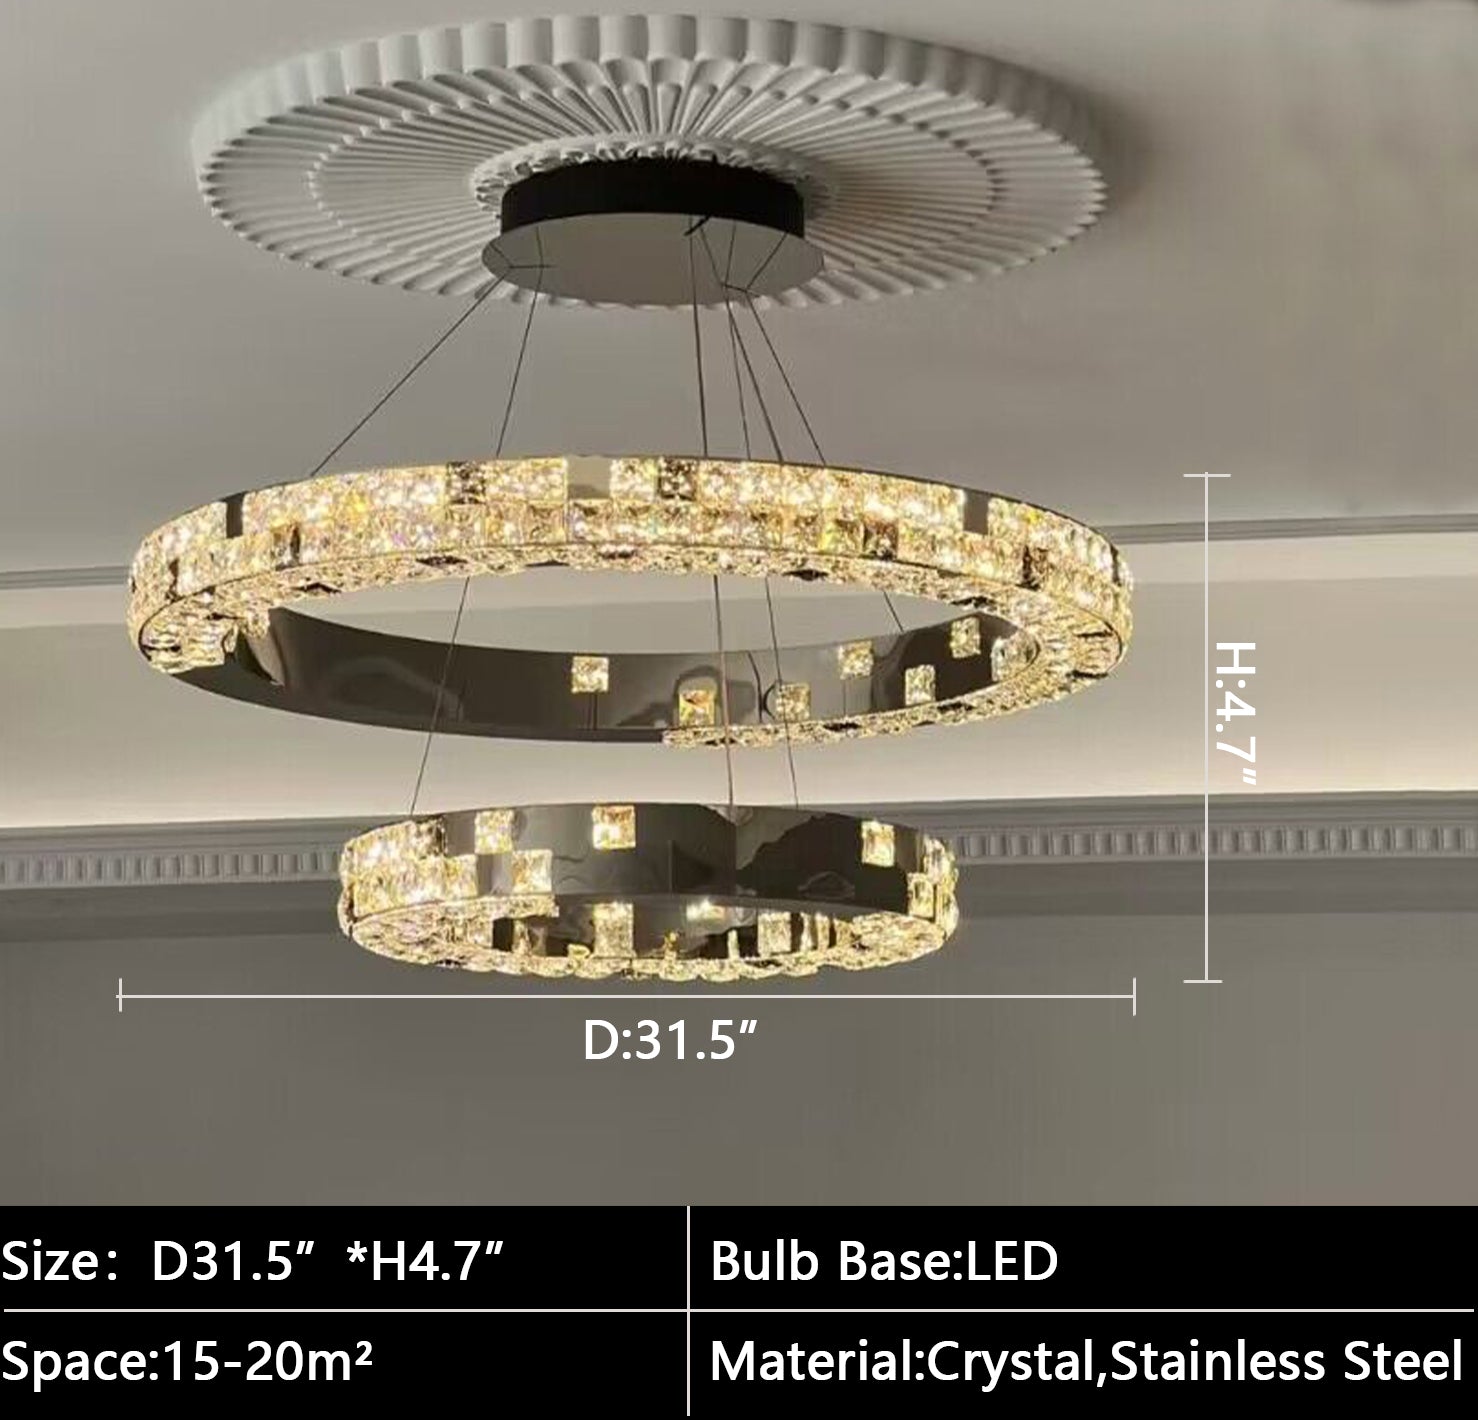 D31.5"*H4.7" Light luxury ring-round two layers/tier crystal chandelier for villas/duplex buidings living room/dining room/bedroom